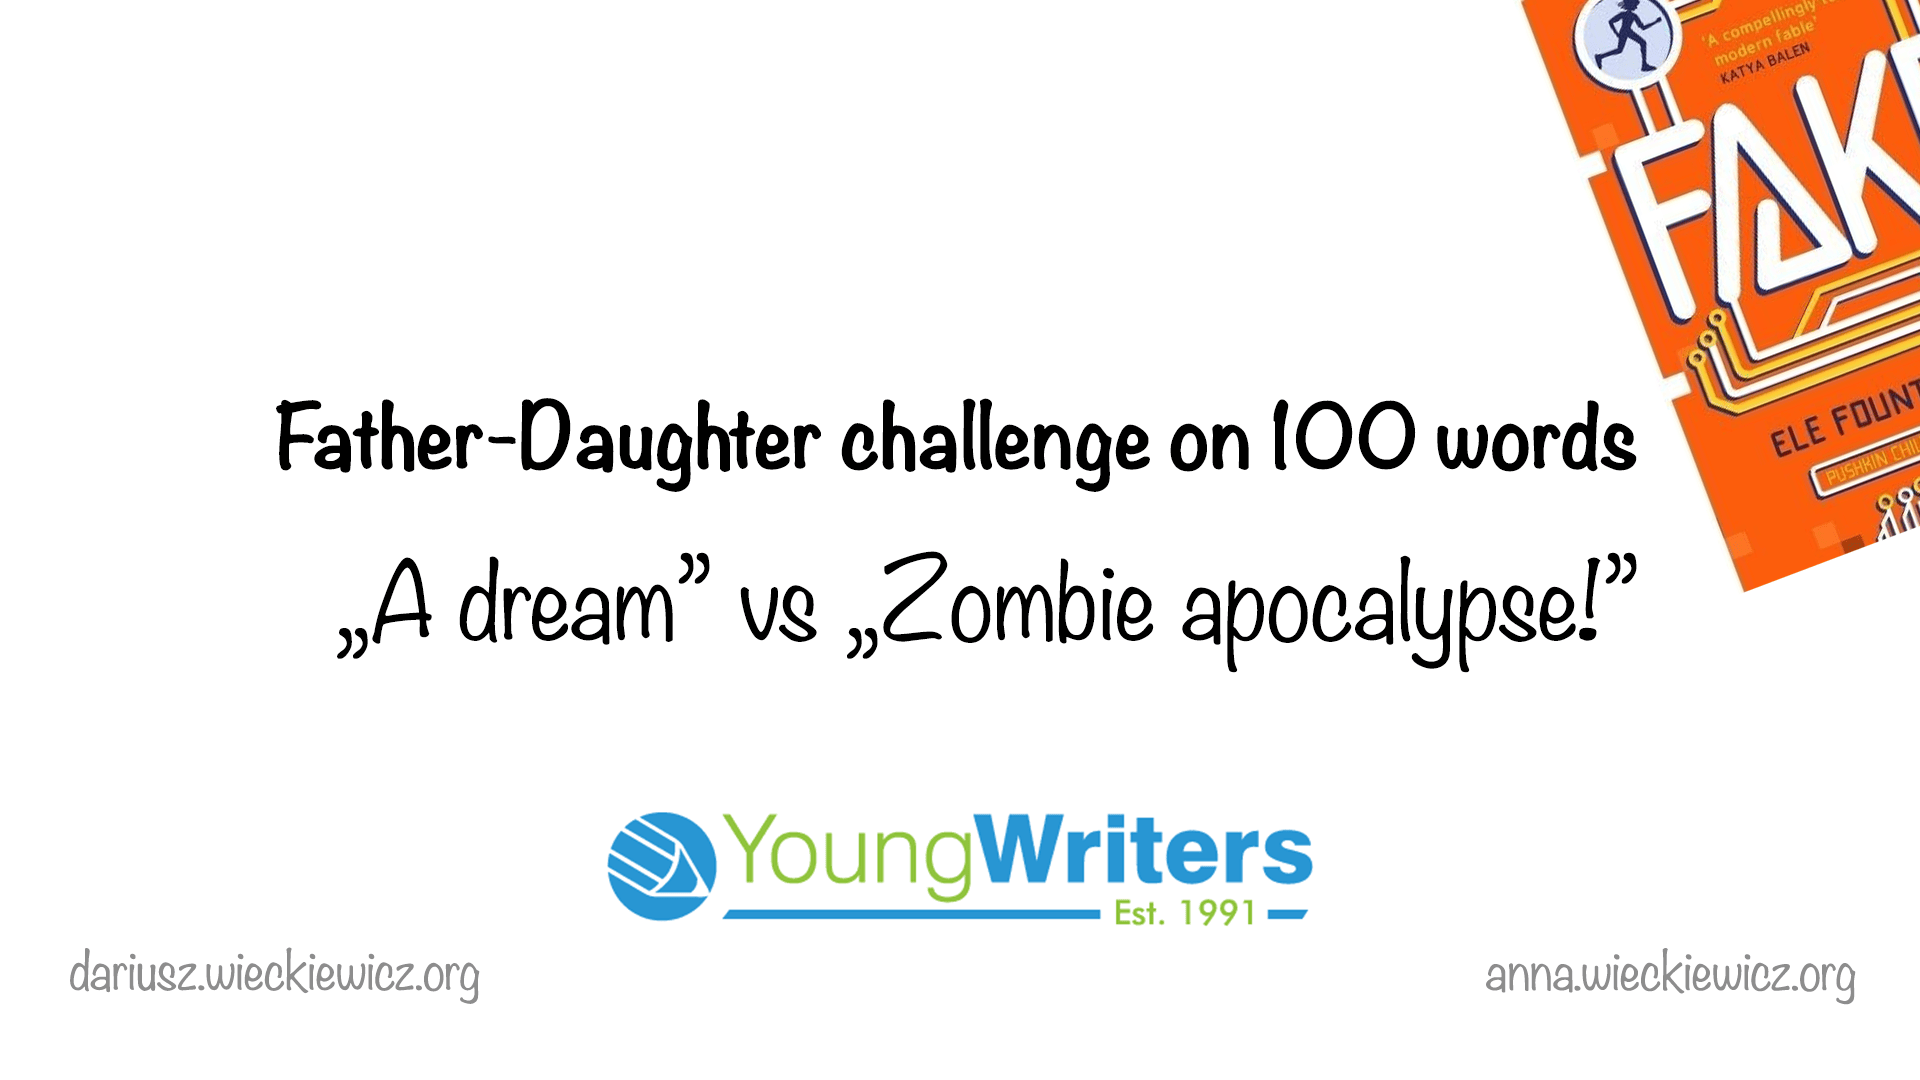 Father-Daughter challenge on 100 words